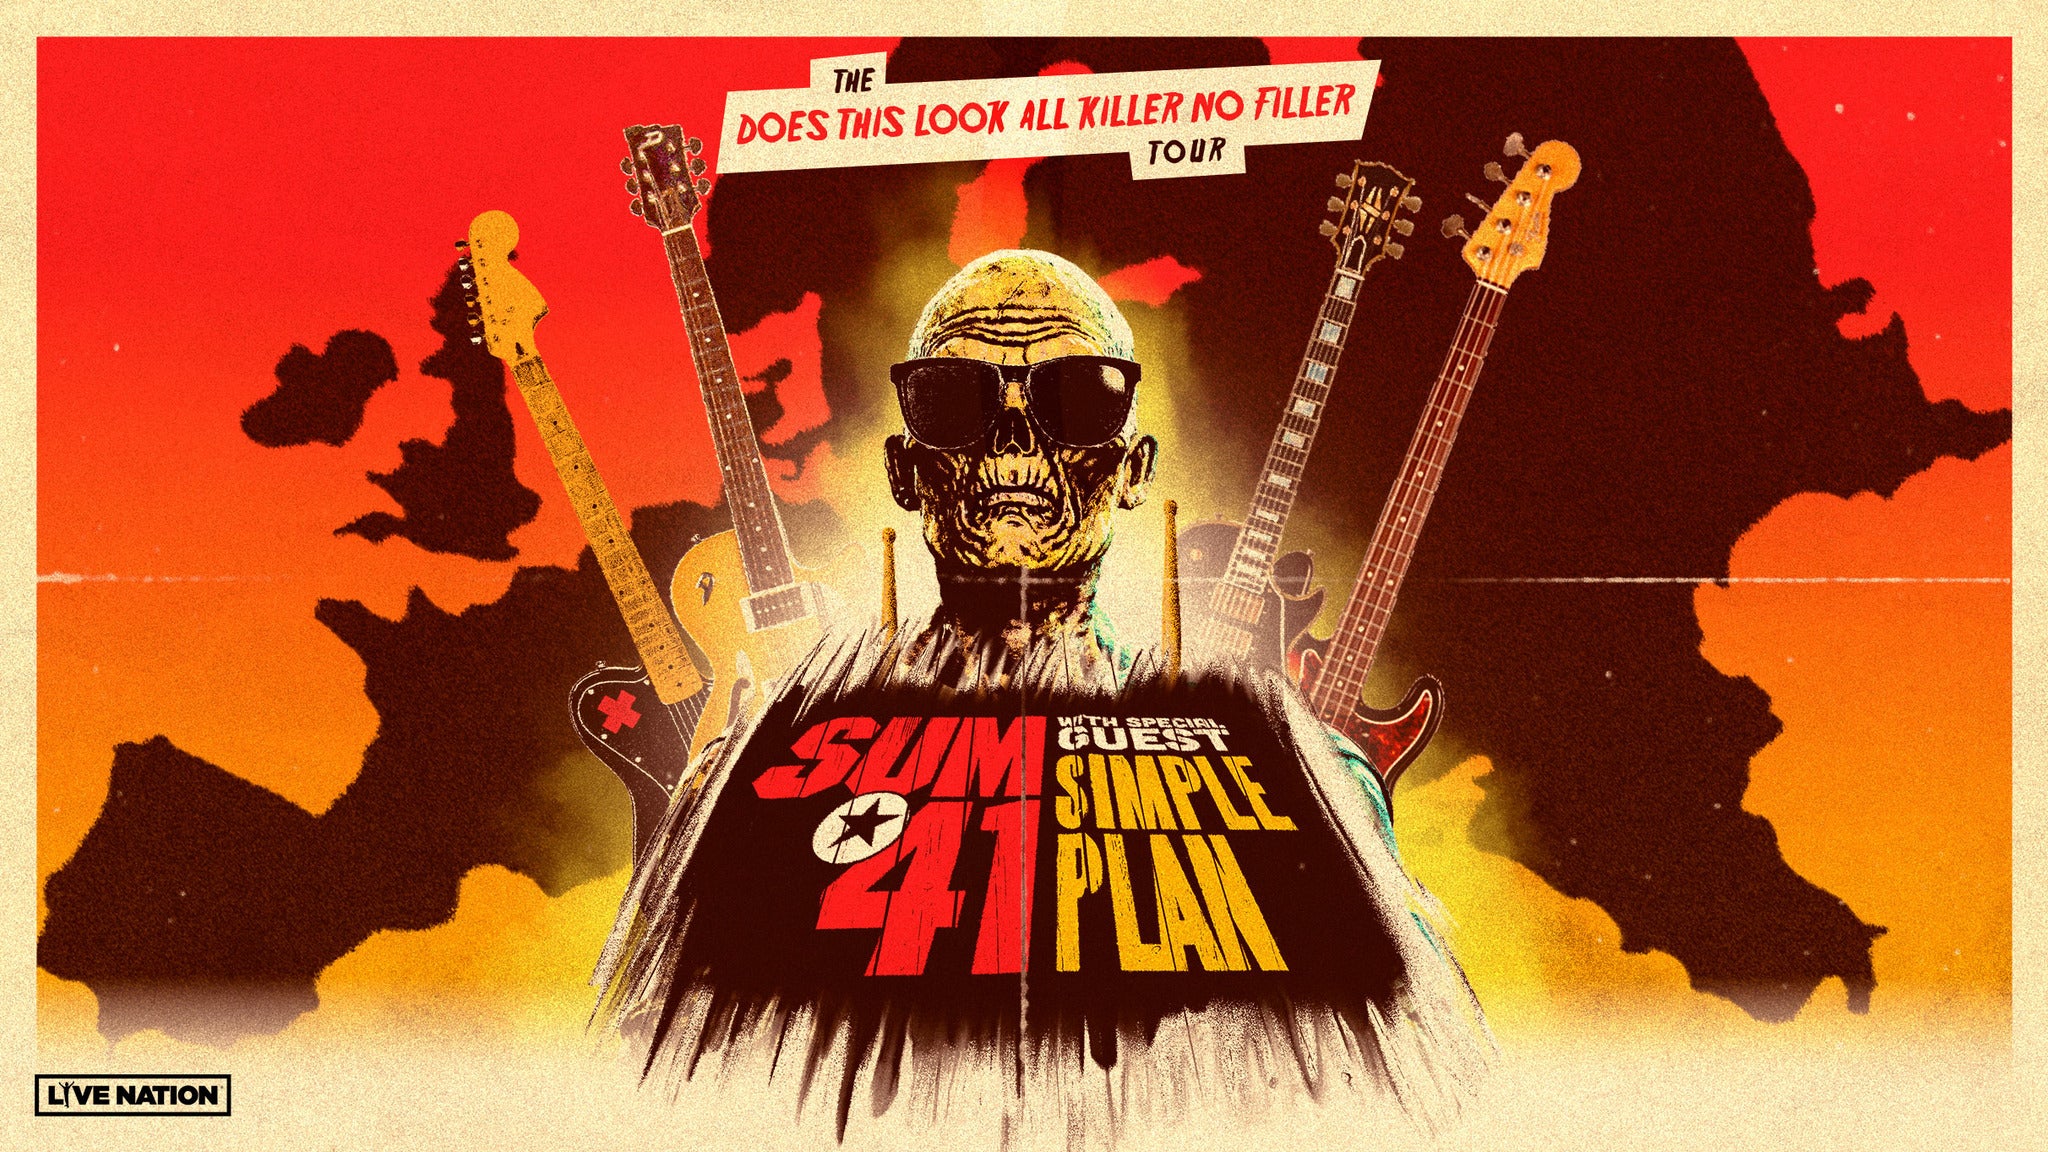 Sum 41 & Simple Plan | The Does This Look All Killer No Filler Tour